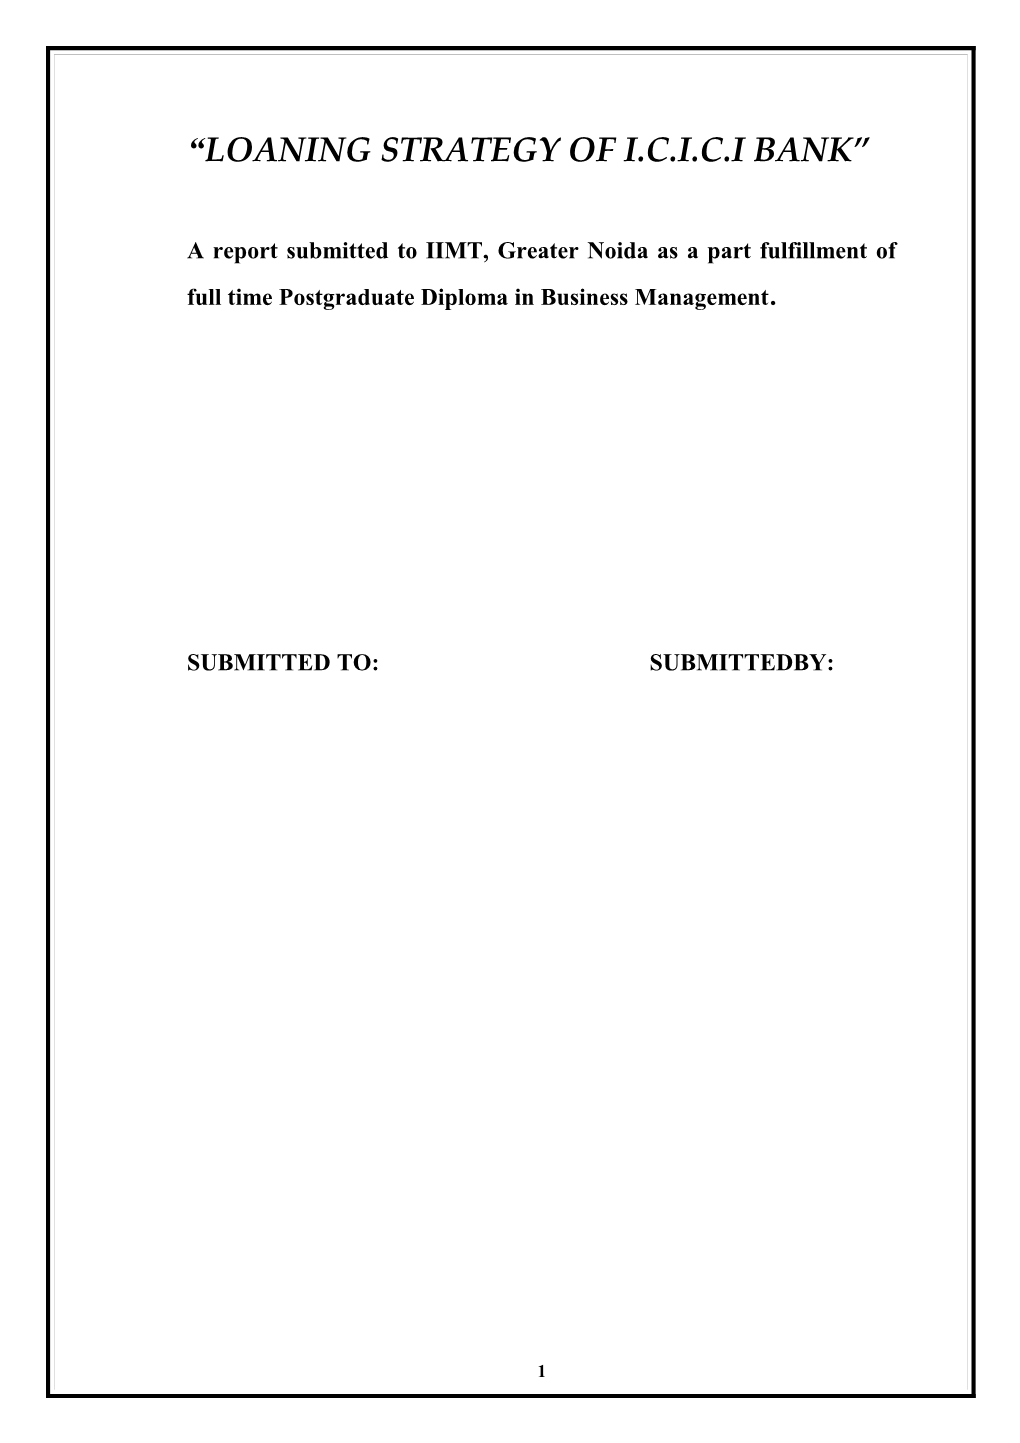 A Report Submitted to IIMT, Greater Noida As a Part Fulfillment of Full Time Postgraduate